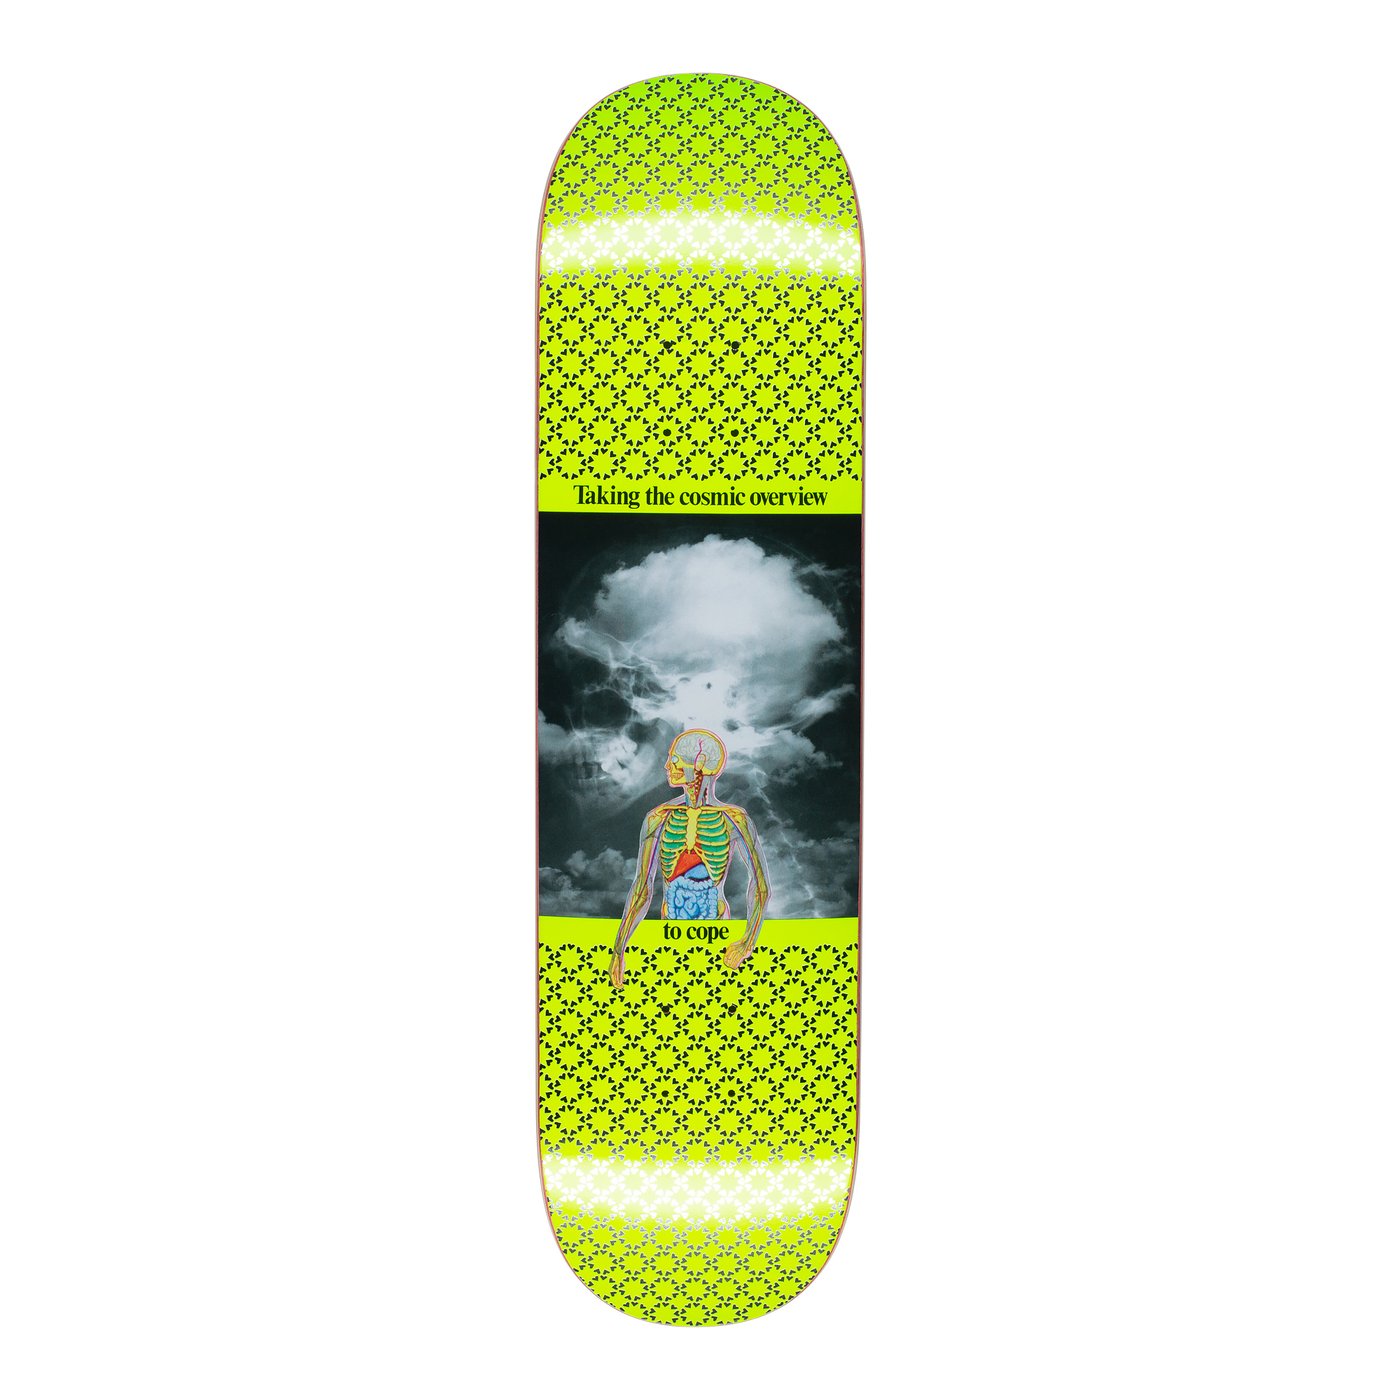 Cope Deck Neon Grn (size options listed)